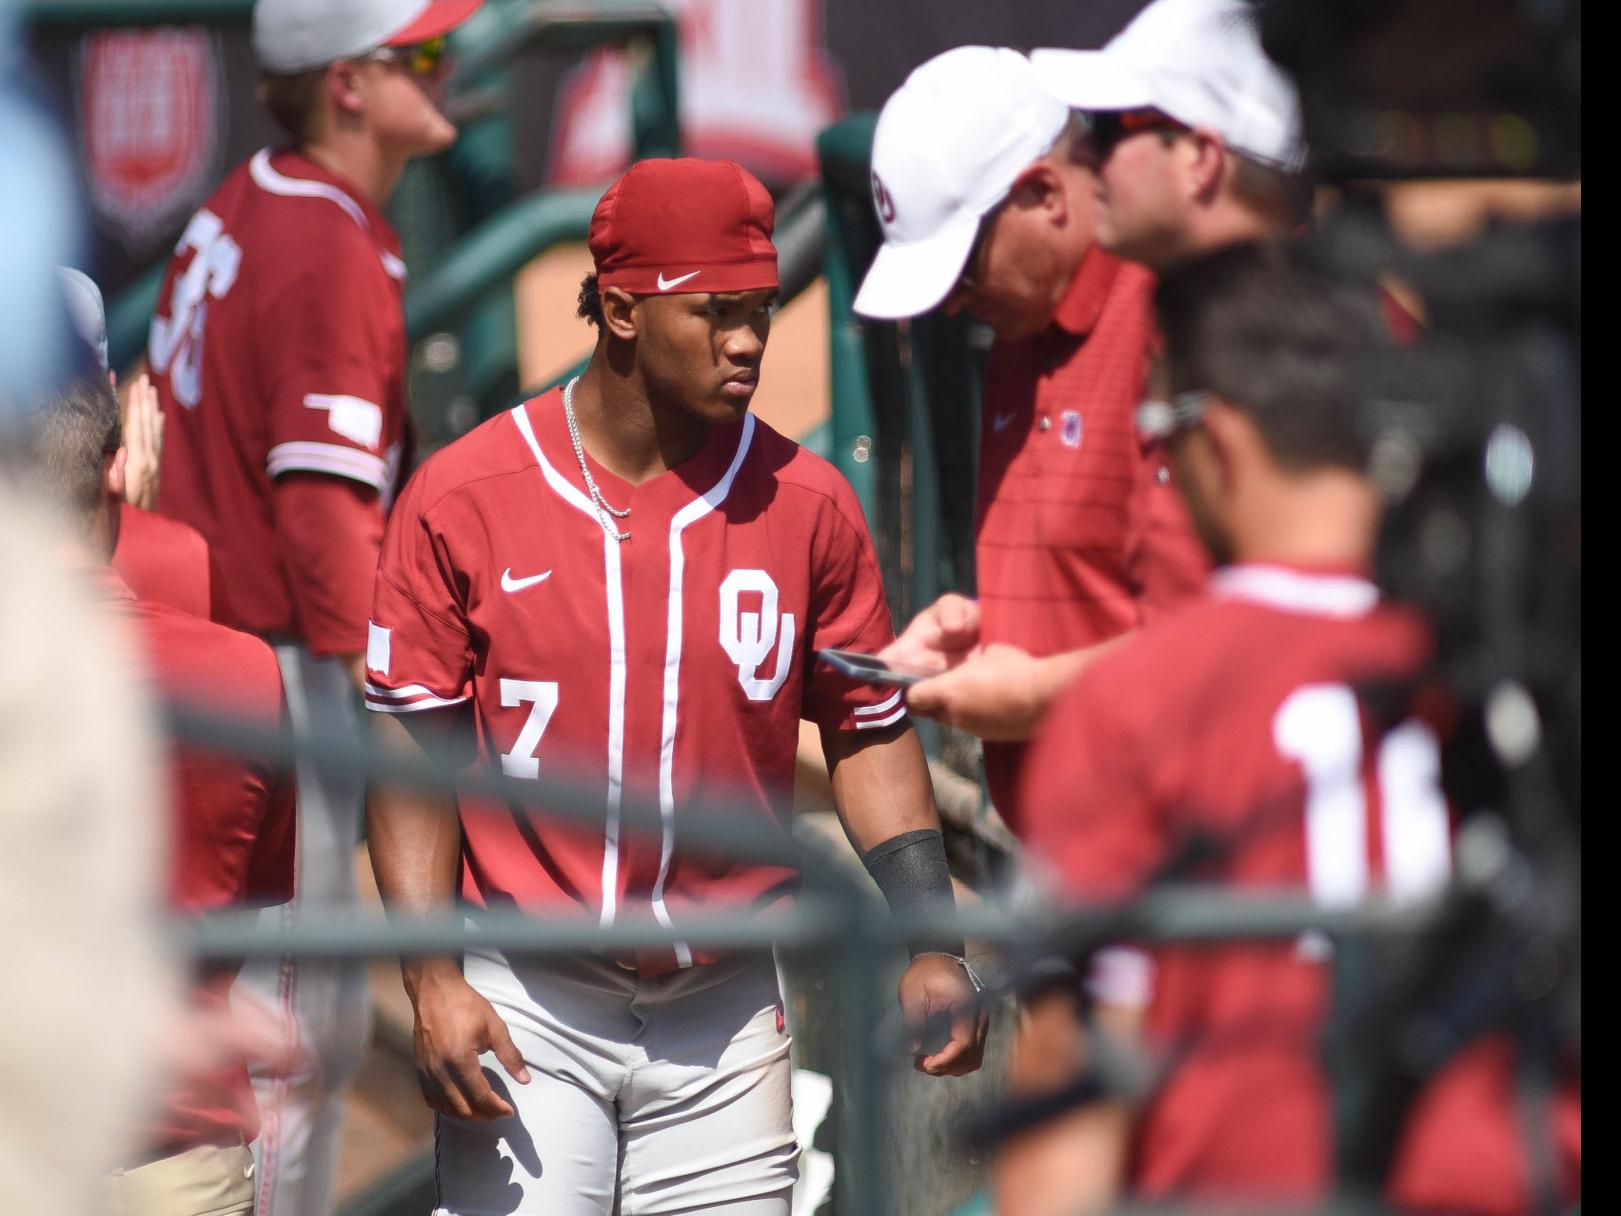 Kyler Murray, selected No. 9 overall in MLB draft, says he will